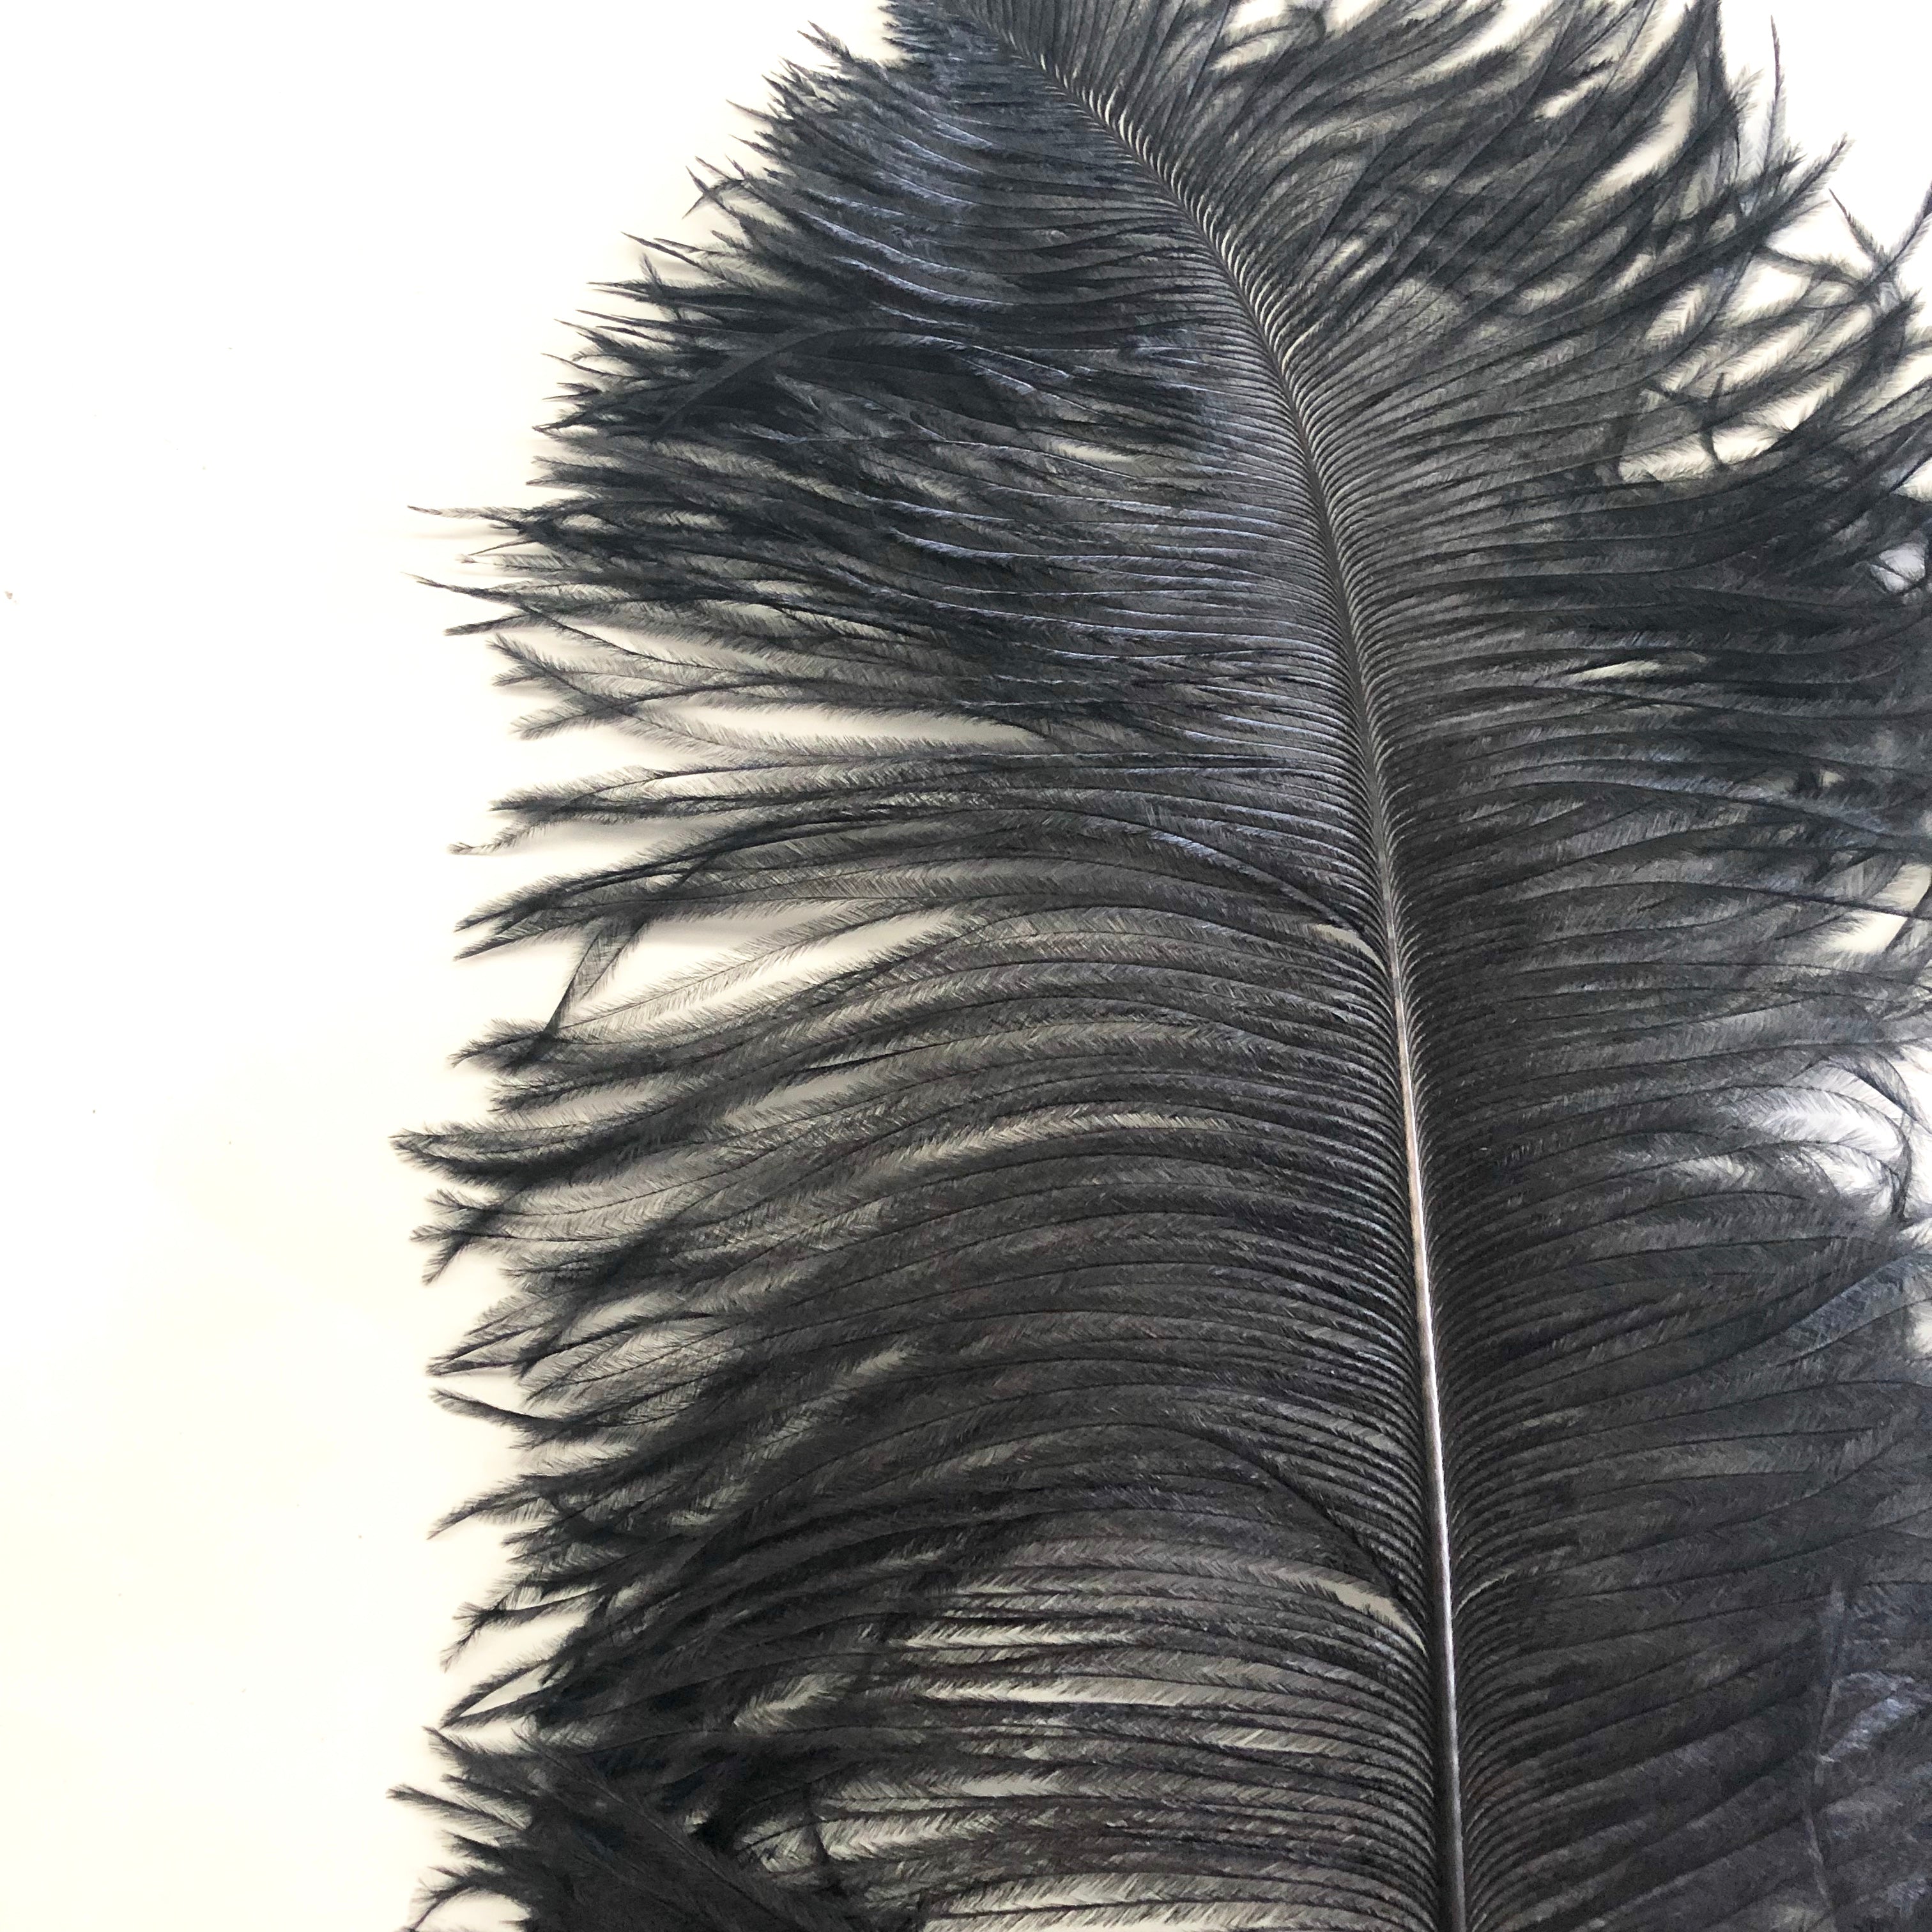 Ostrich Wings Feather Plume 70-75cm (27-29") - Black